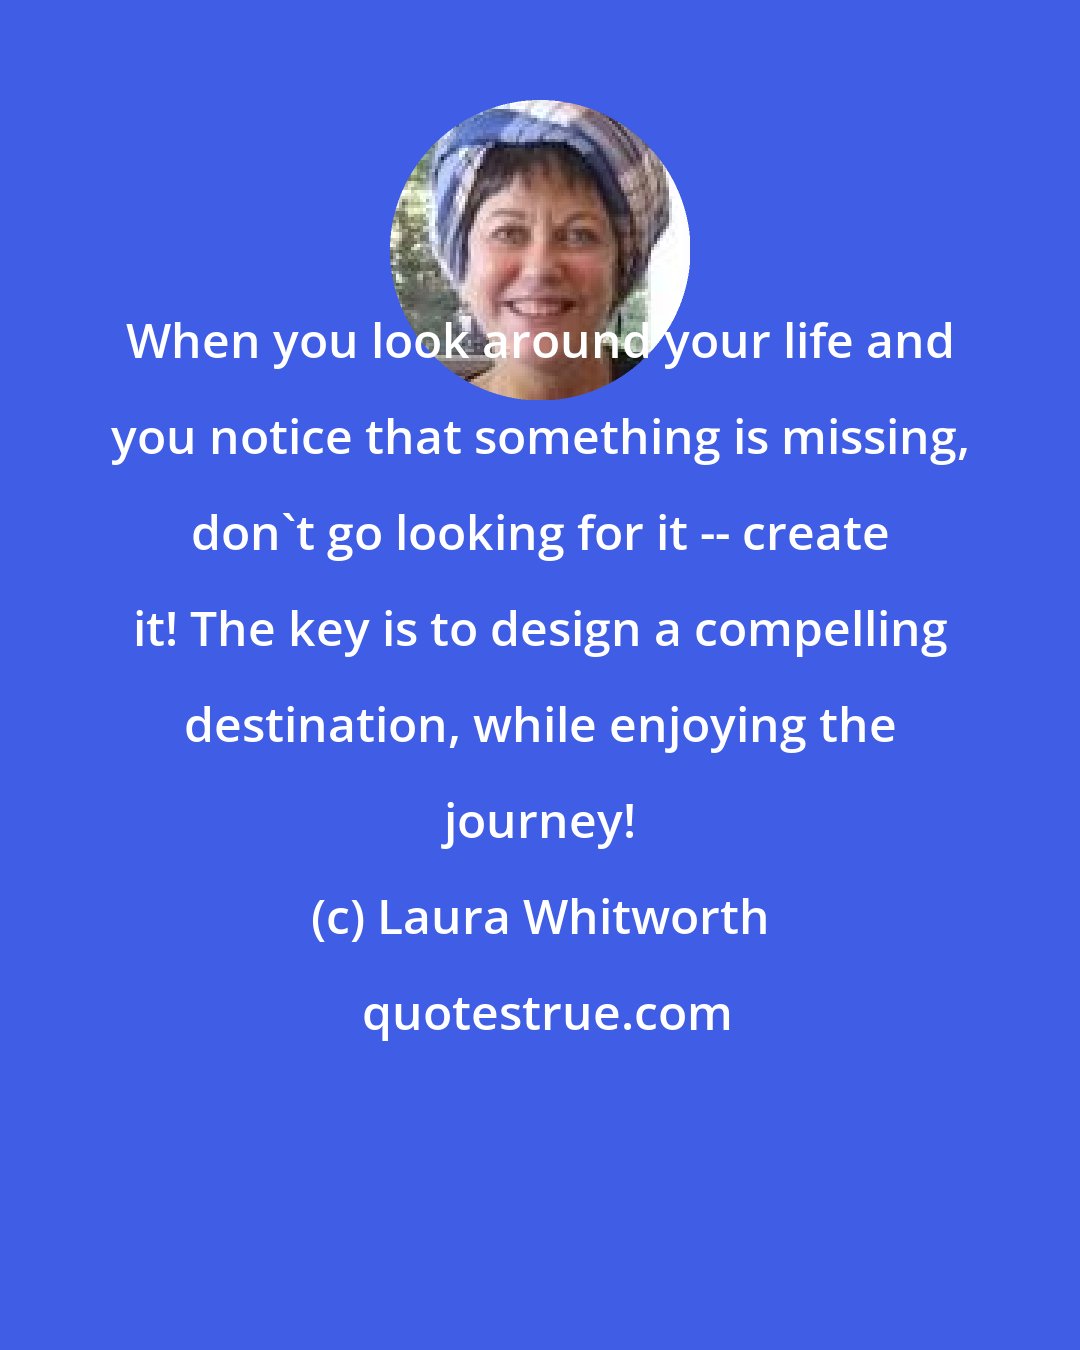 Laura Whitworth: When you look around your life and you notice that something is missing, don't go looking for it -- create it! The key is to design a compelling destination, while enjoying the journey!